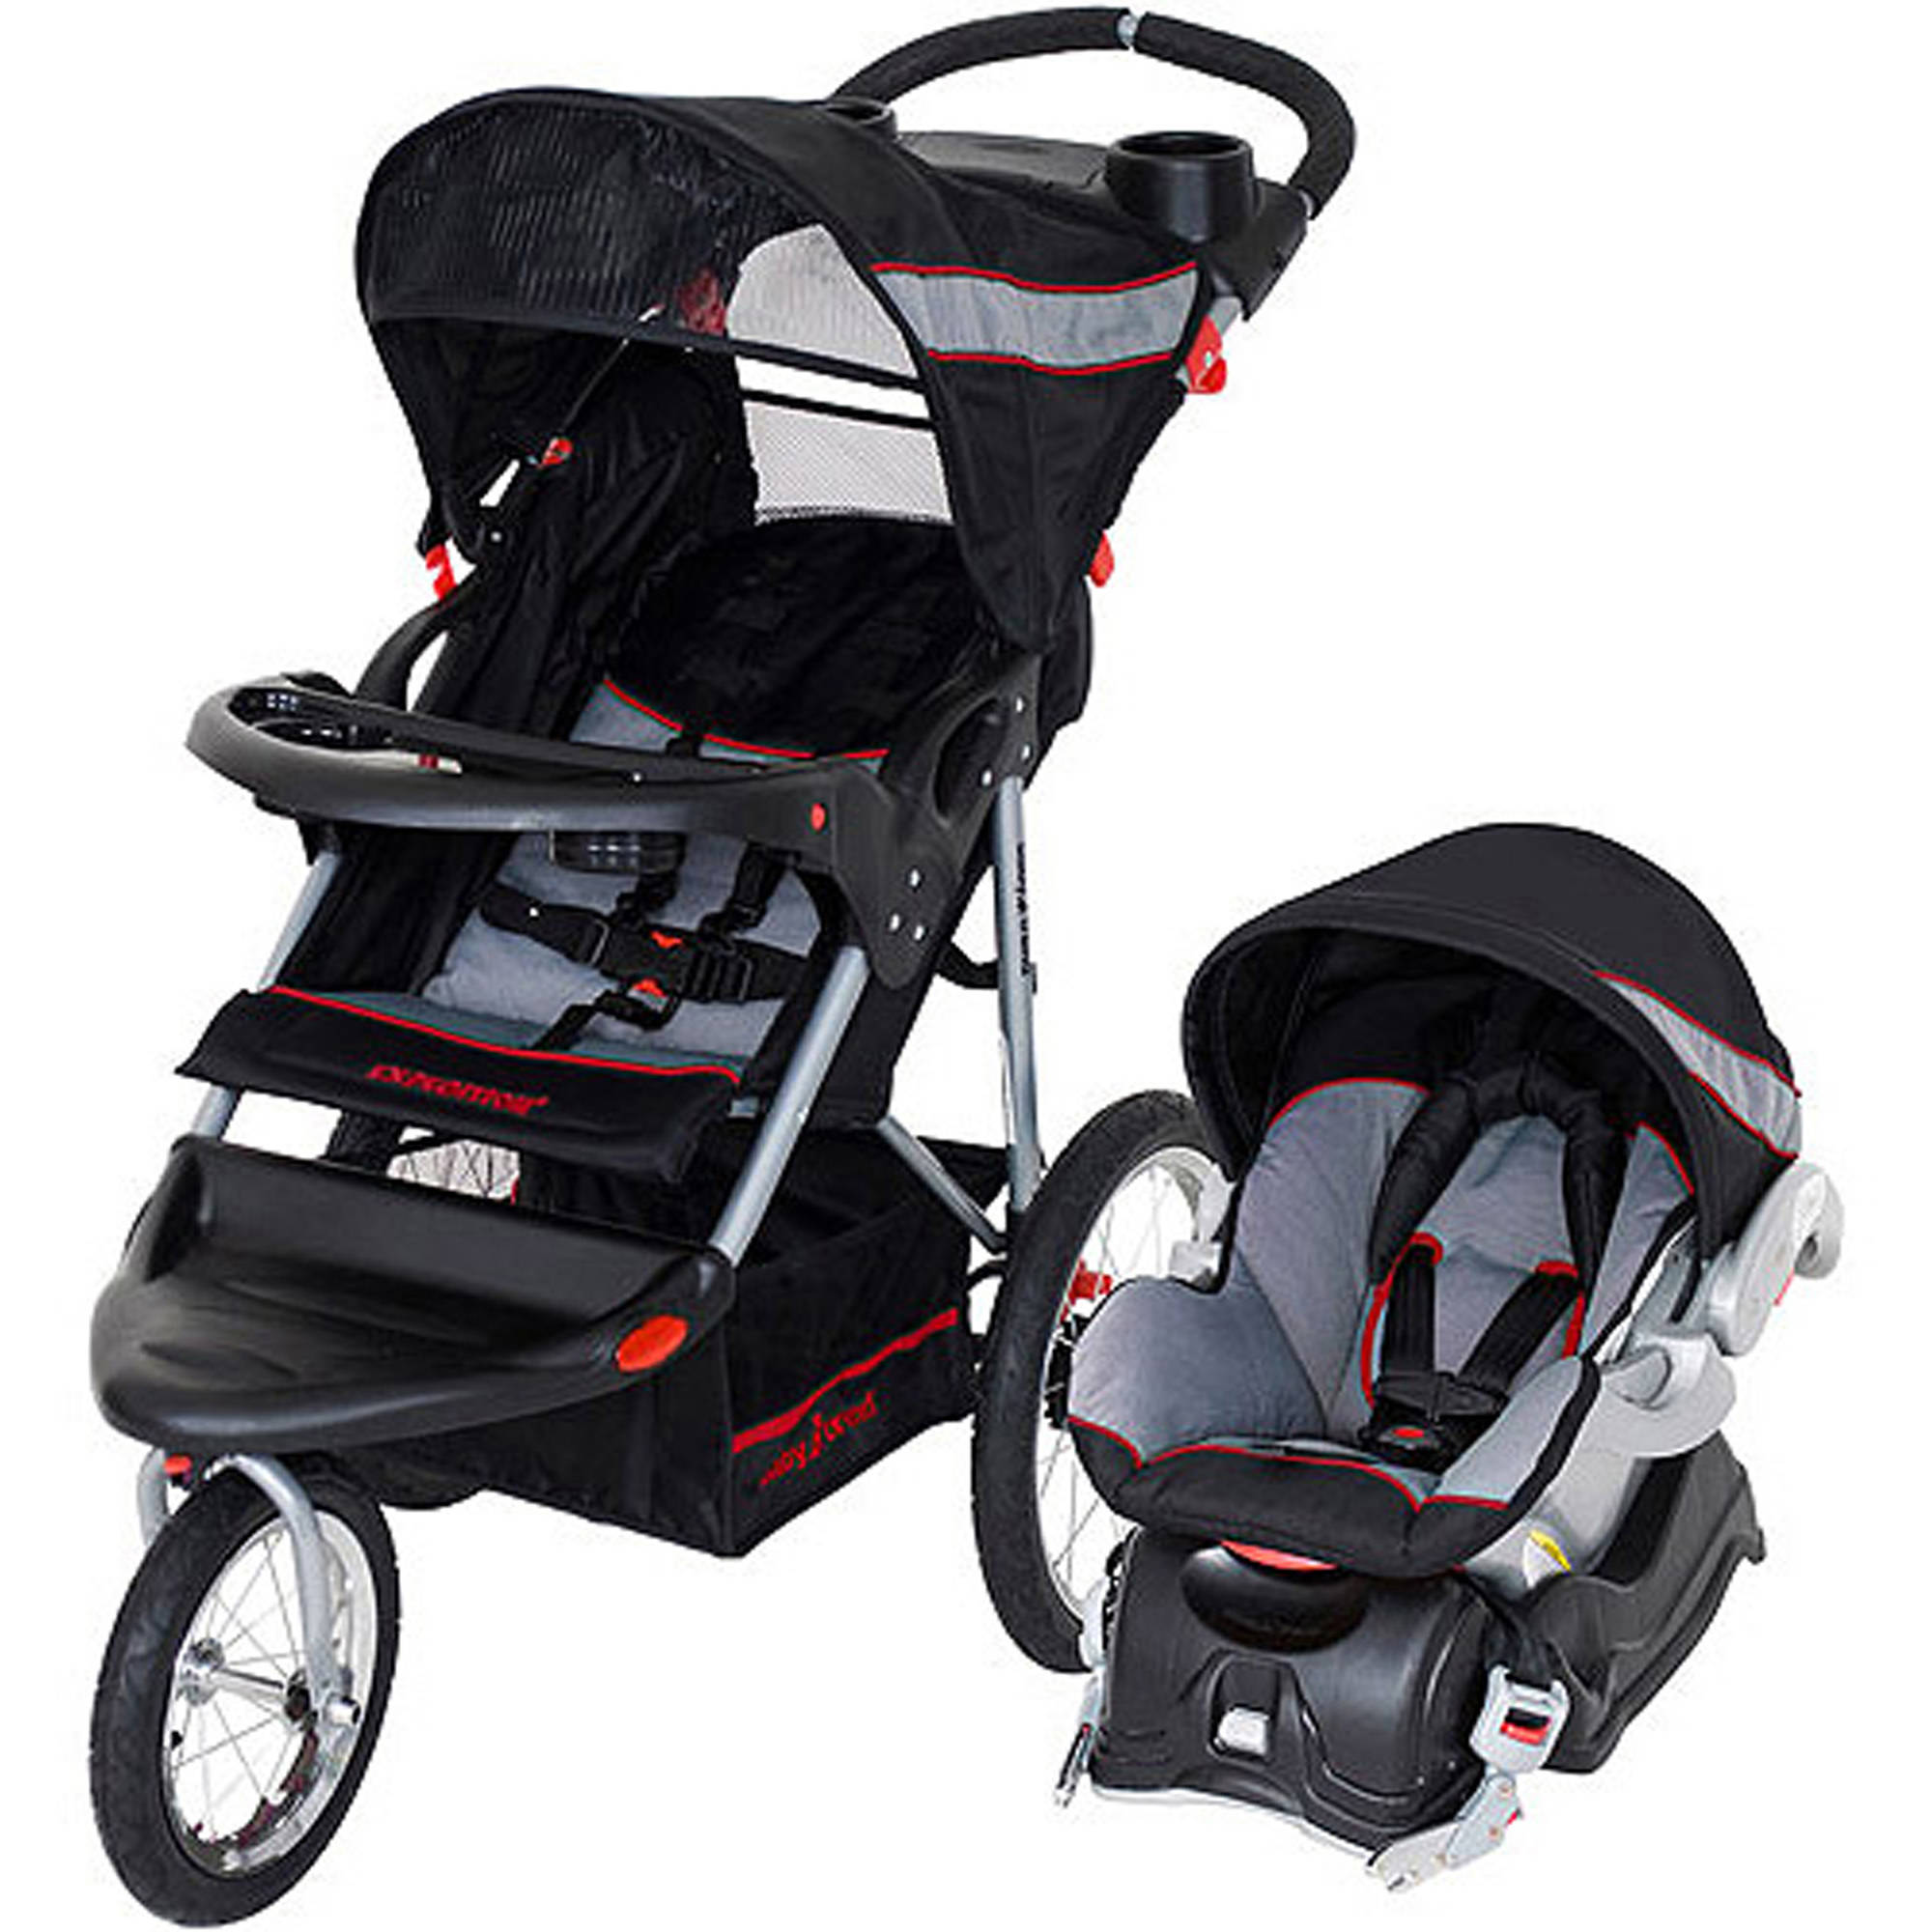 Baby Trend Expedition Travel System with Stroller & Car Seat, Millennium - image 1 of 4